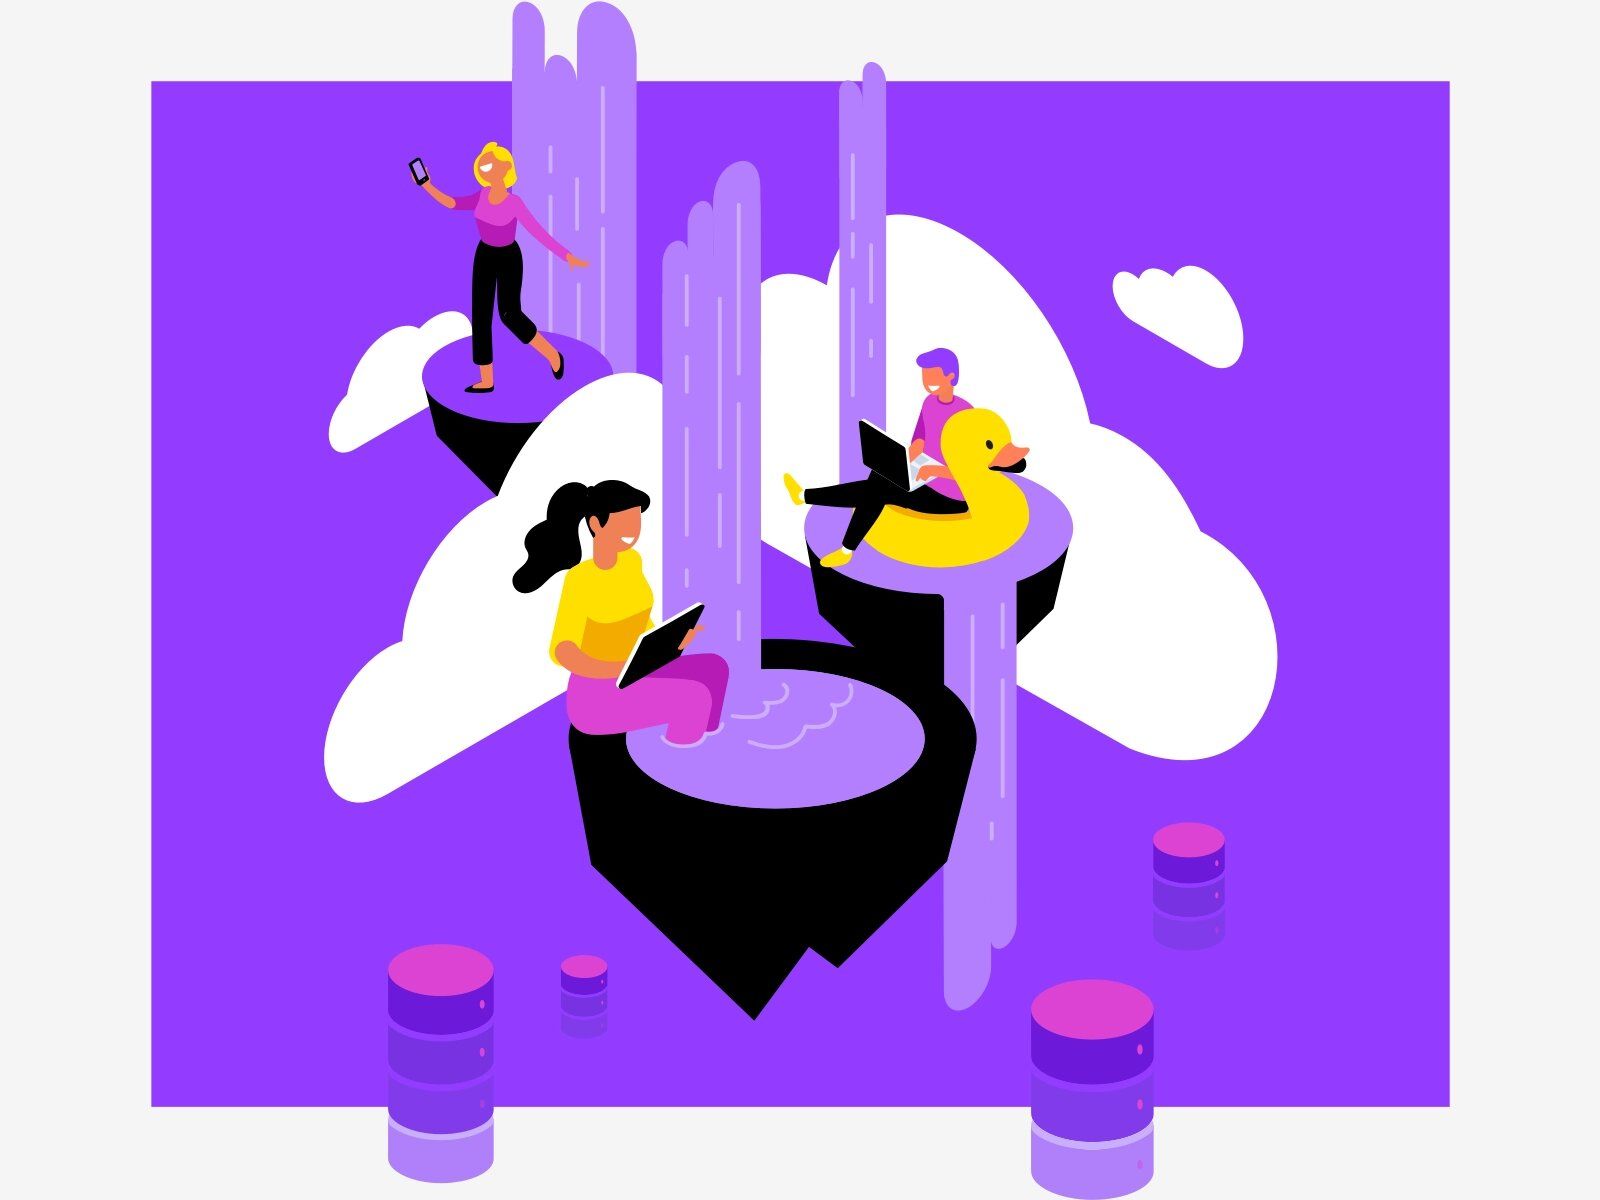 Serverless computing allows using a serverless business logic with automatic scaling and services of cloud providers as well with all management tasks taken care of by the provider (*image by [Stas Kulesh 🥝](https://dribbble.com/stas_kulesh){ rel="nofollow" target="_blank" .default-md}*)